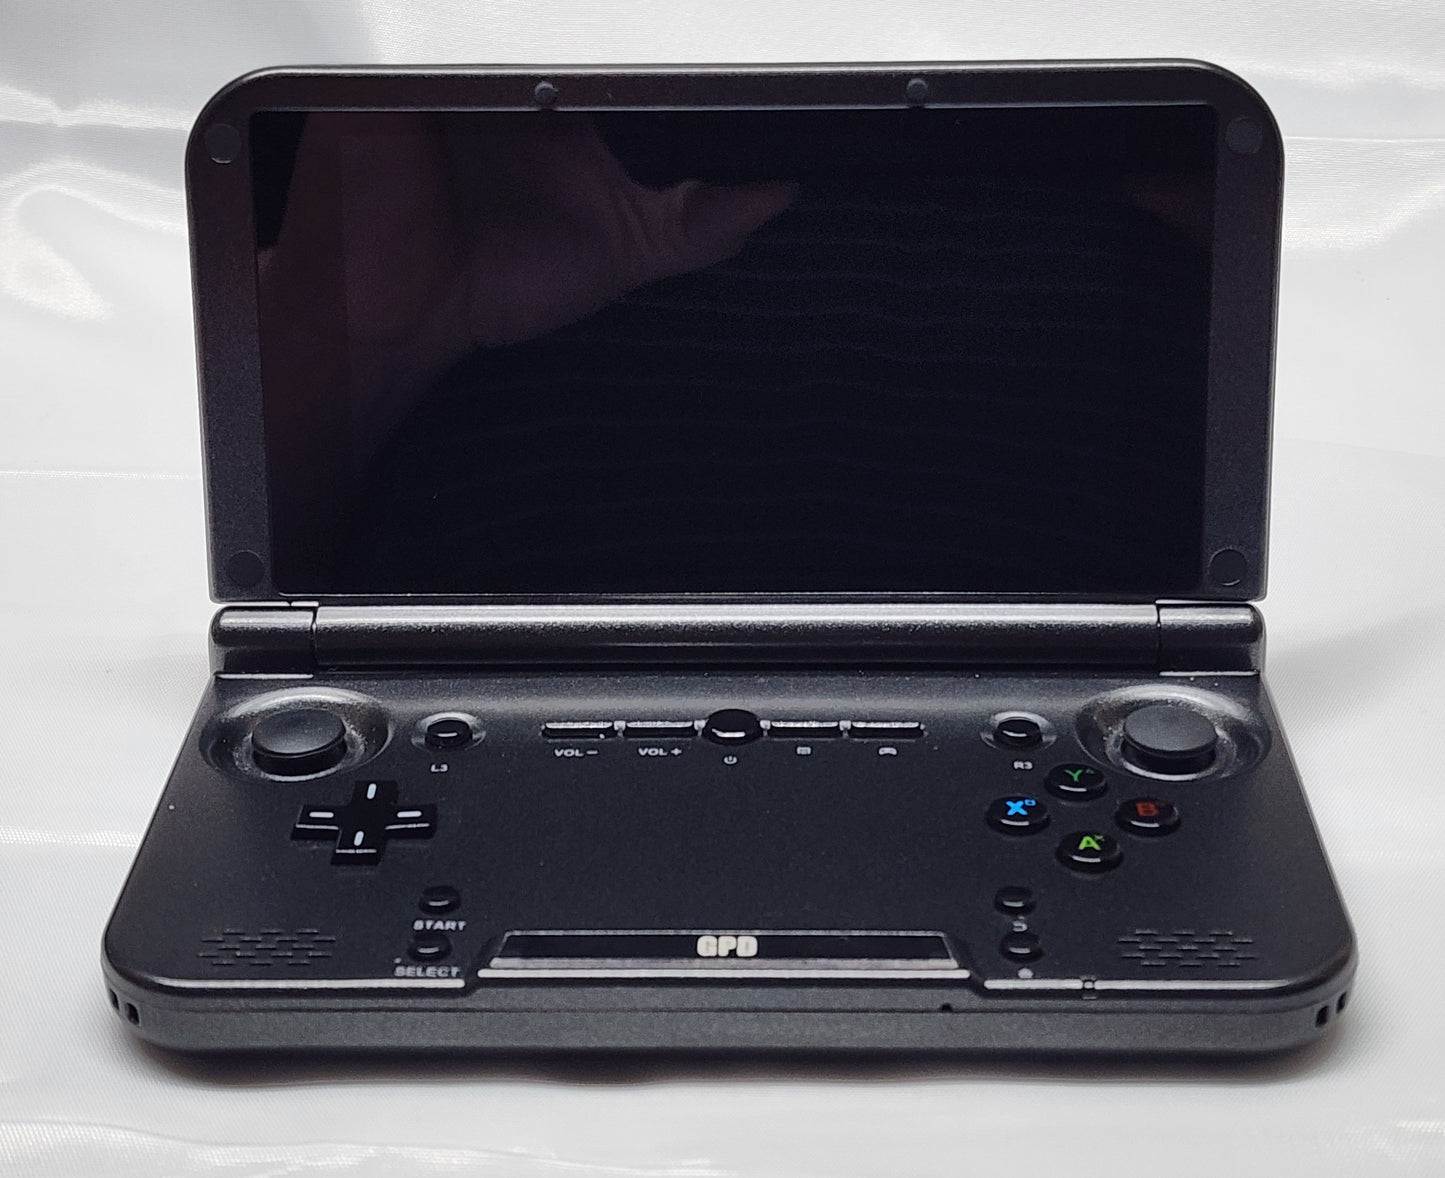 GPD XD Plus Handheld Gaming Console 5" Touchscreen. Used